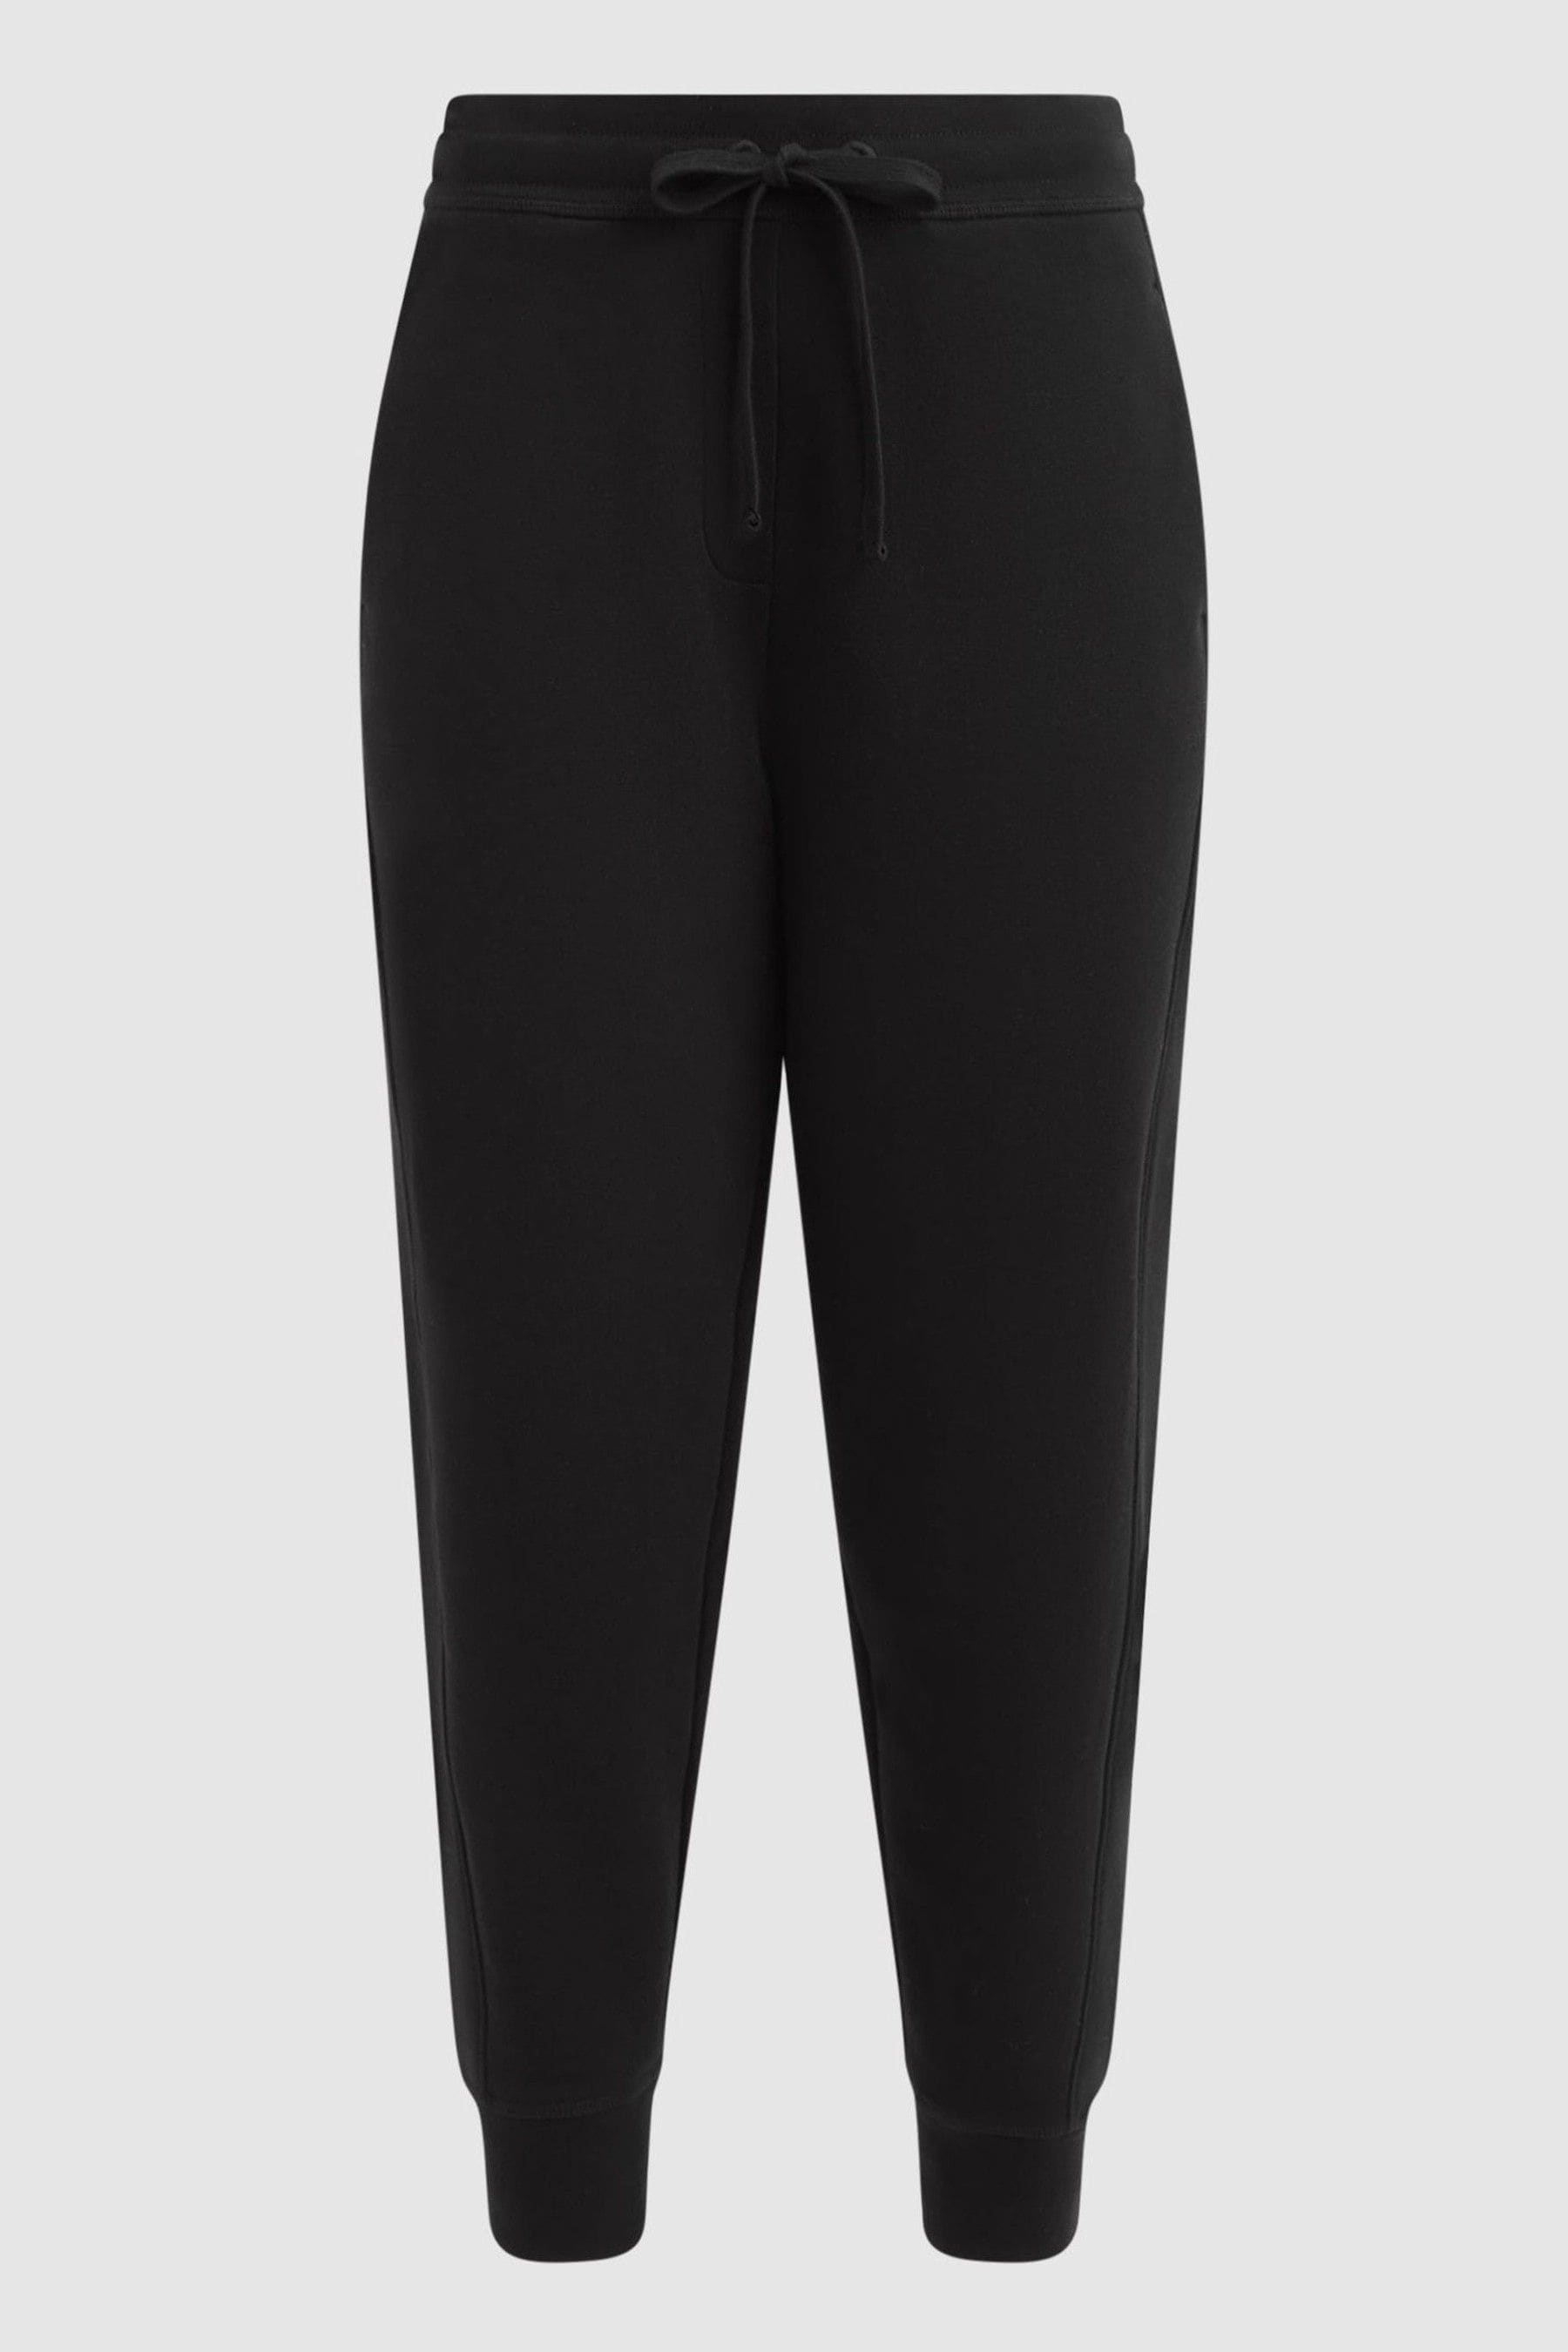 Buy Reiss Black Bronte Cotton Drawstring Cuffed Joggers from the Next ...